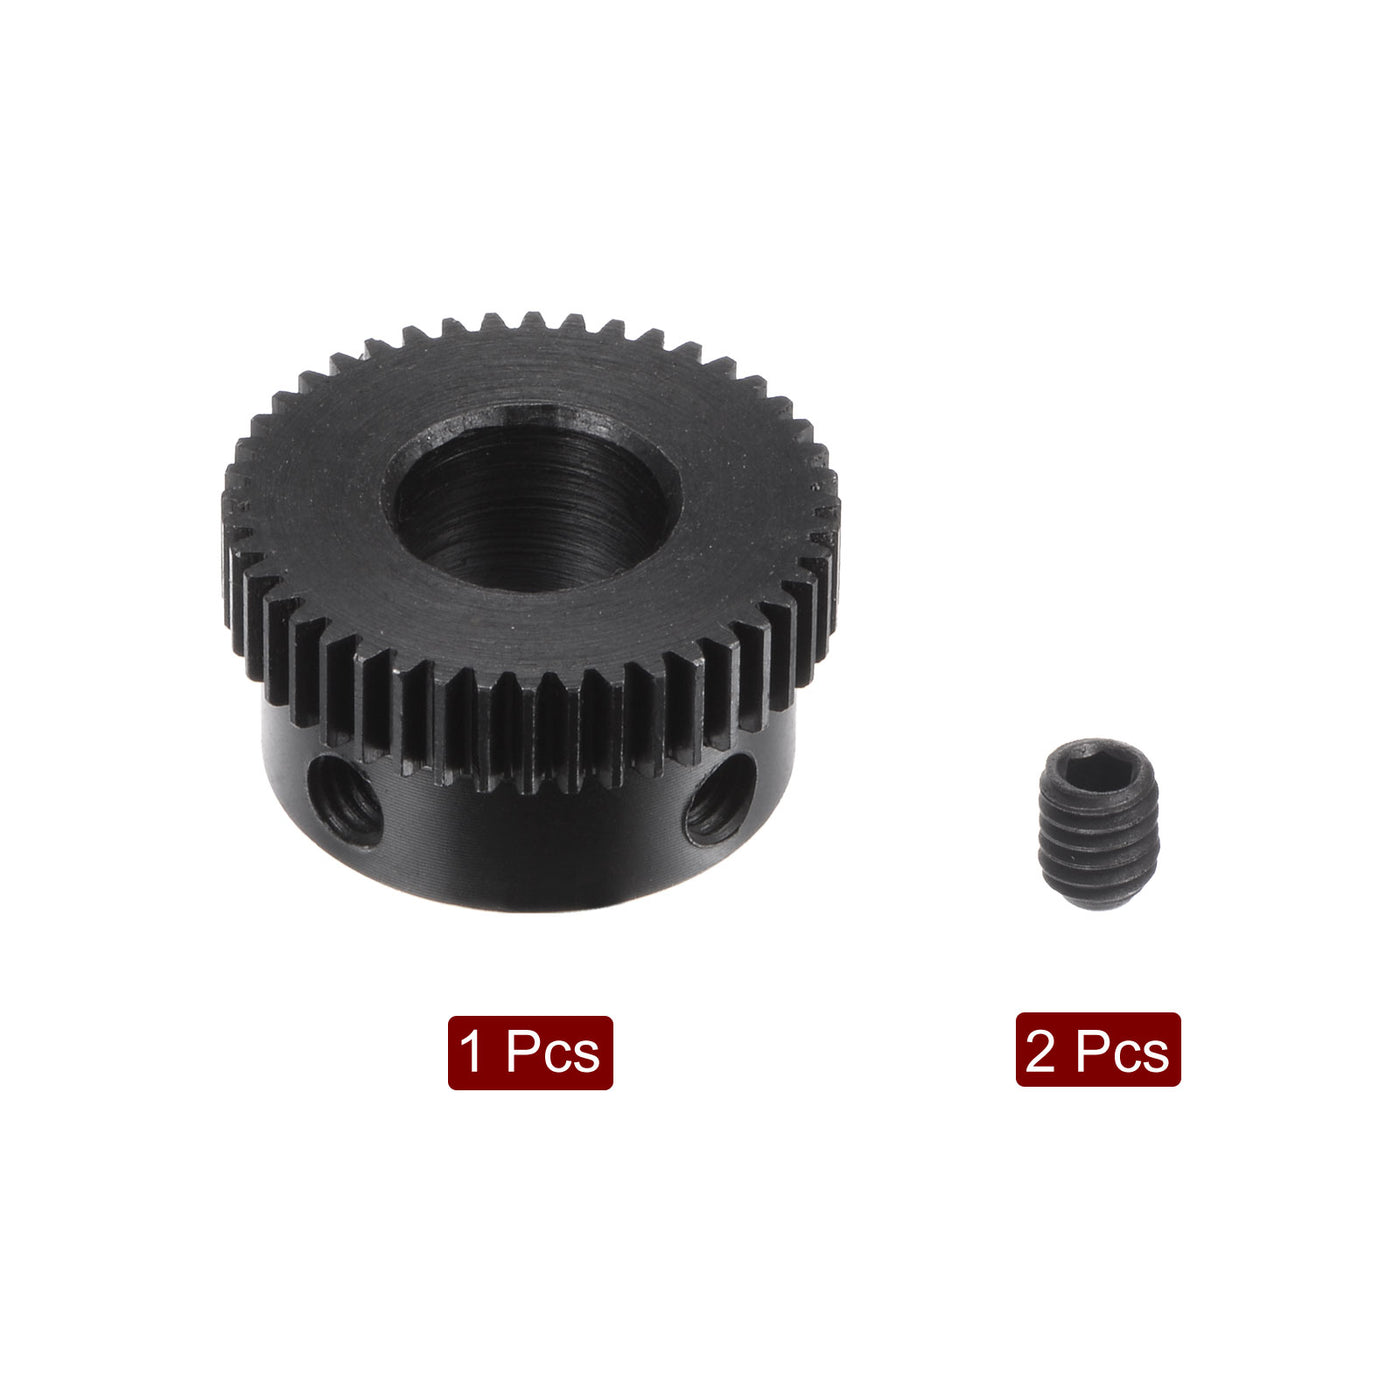 uxcell Uxcell 0.5 Mod 44T 10mm Bore 23mm Outer Dia 45# Carbon Steel Motor Pinion Gear Set